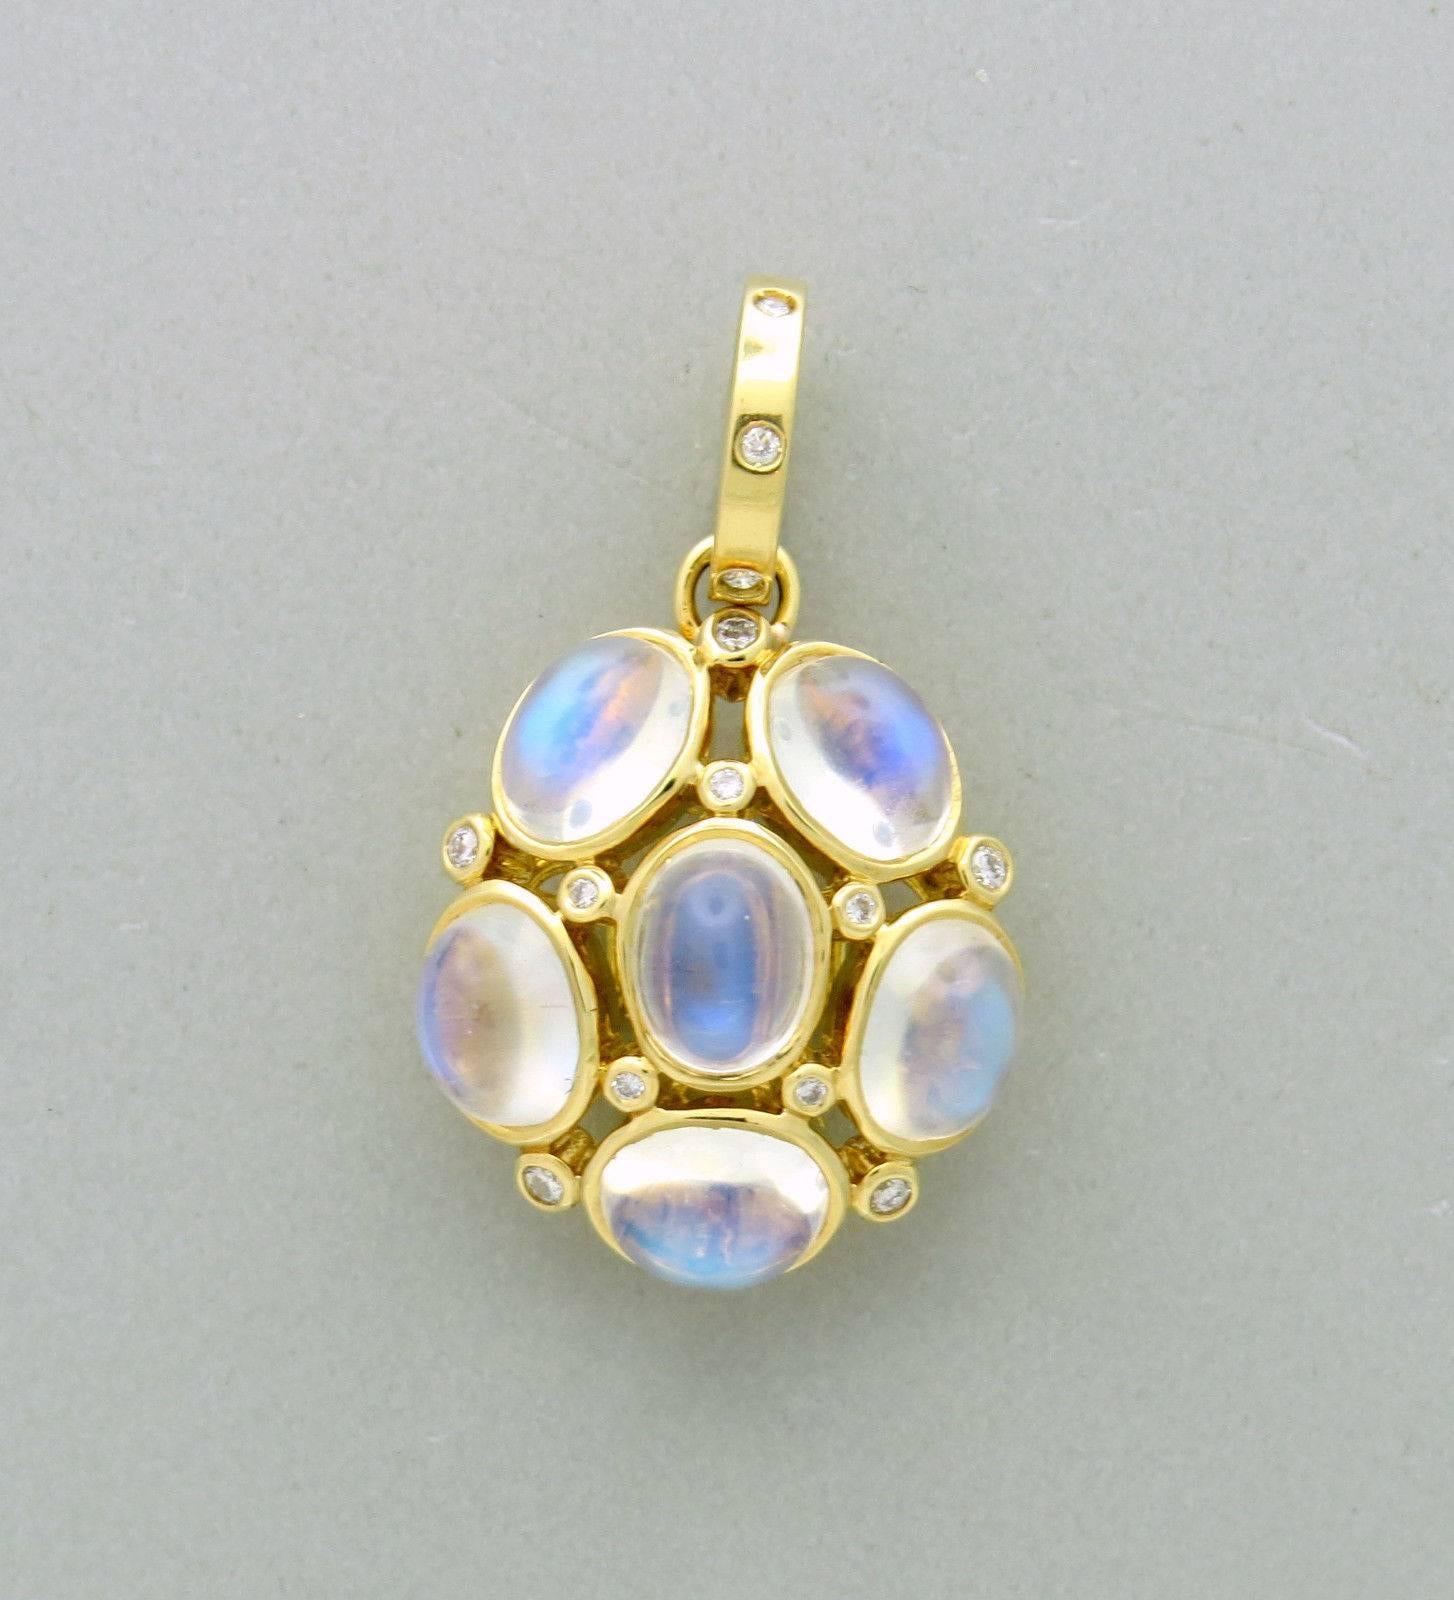 18k gold pendant, crafted by Temple St. Clair for Nirvana collection, set with moonstones and approx. 0.31ctw in diamonds. Pendant is 1 1/2" long with bale x 7/8" at widest point. Marked with Temple mark and 750. Weight of the piece - 14.7